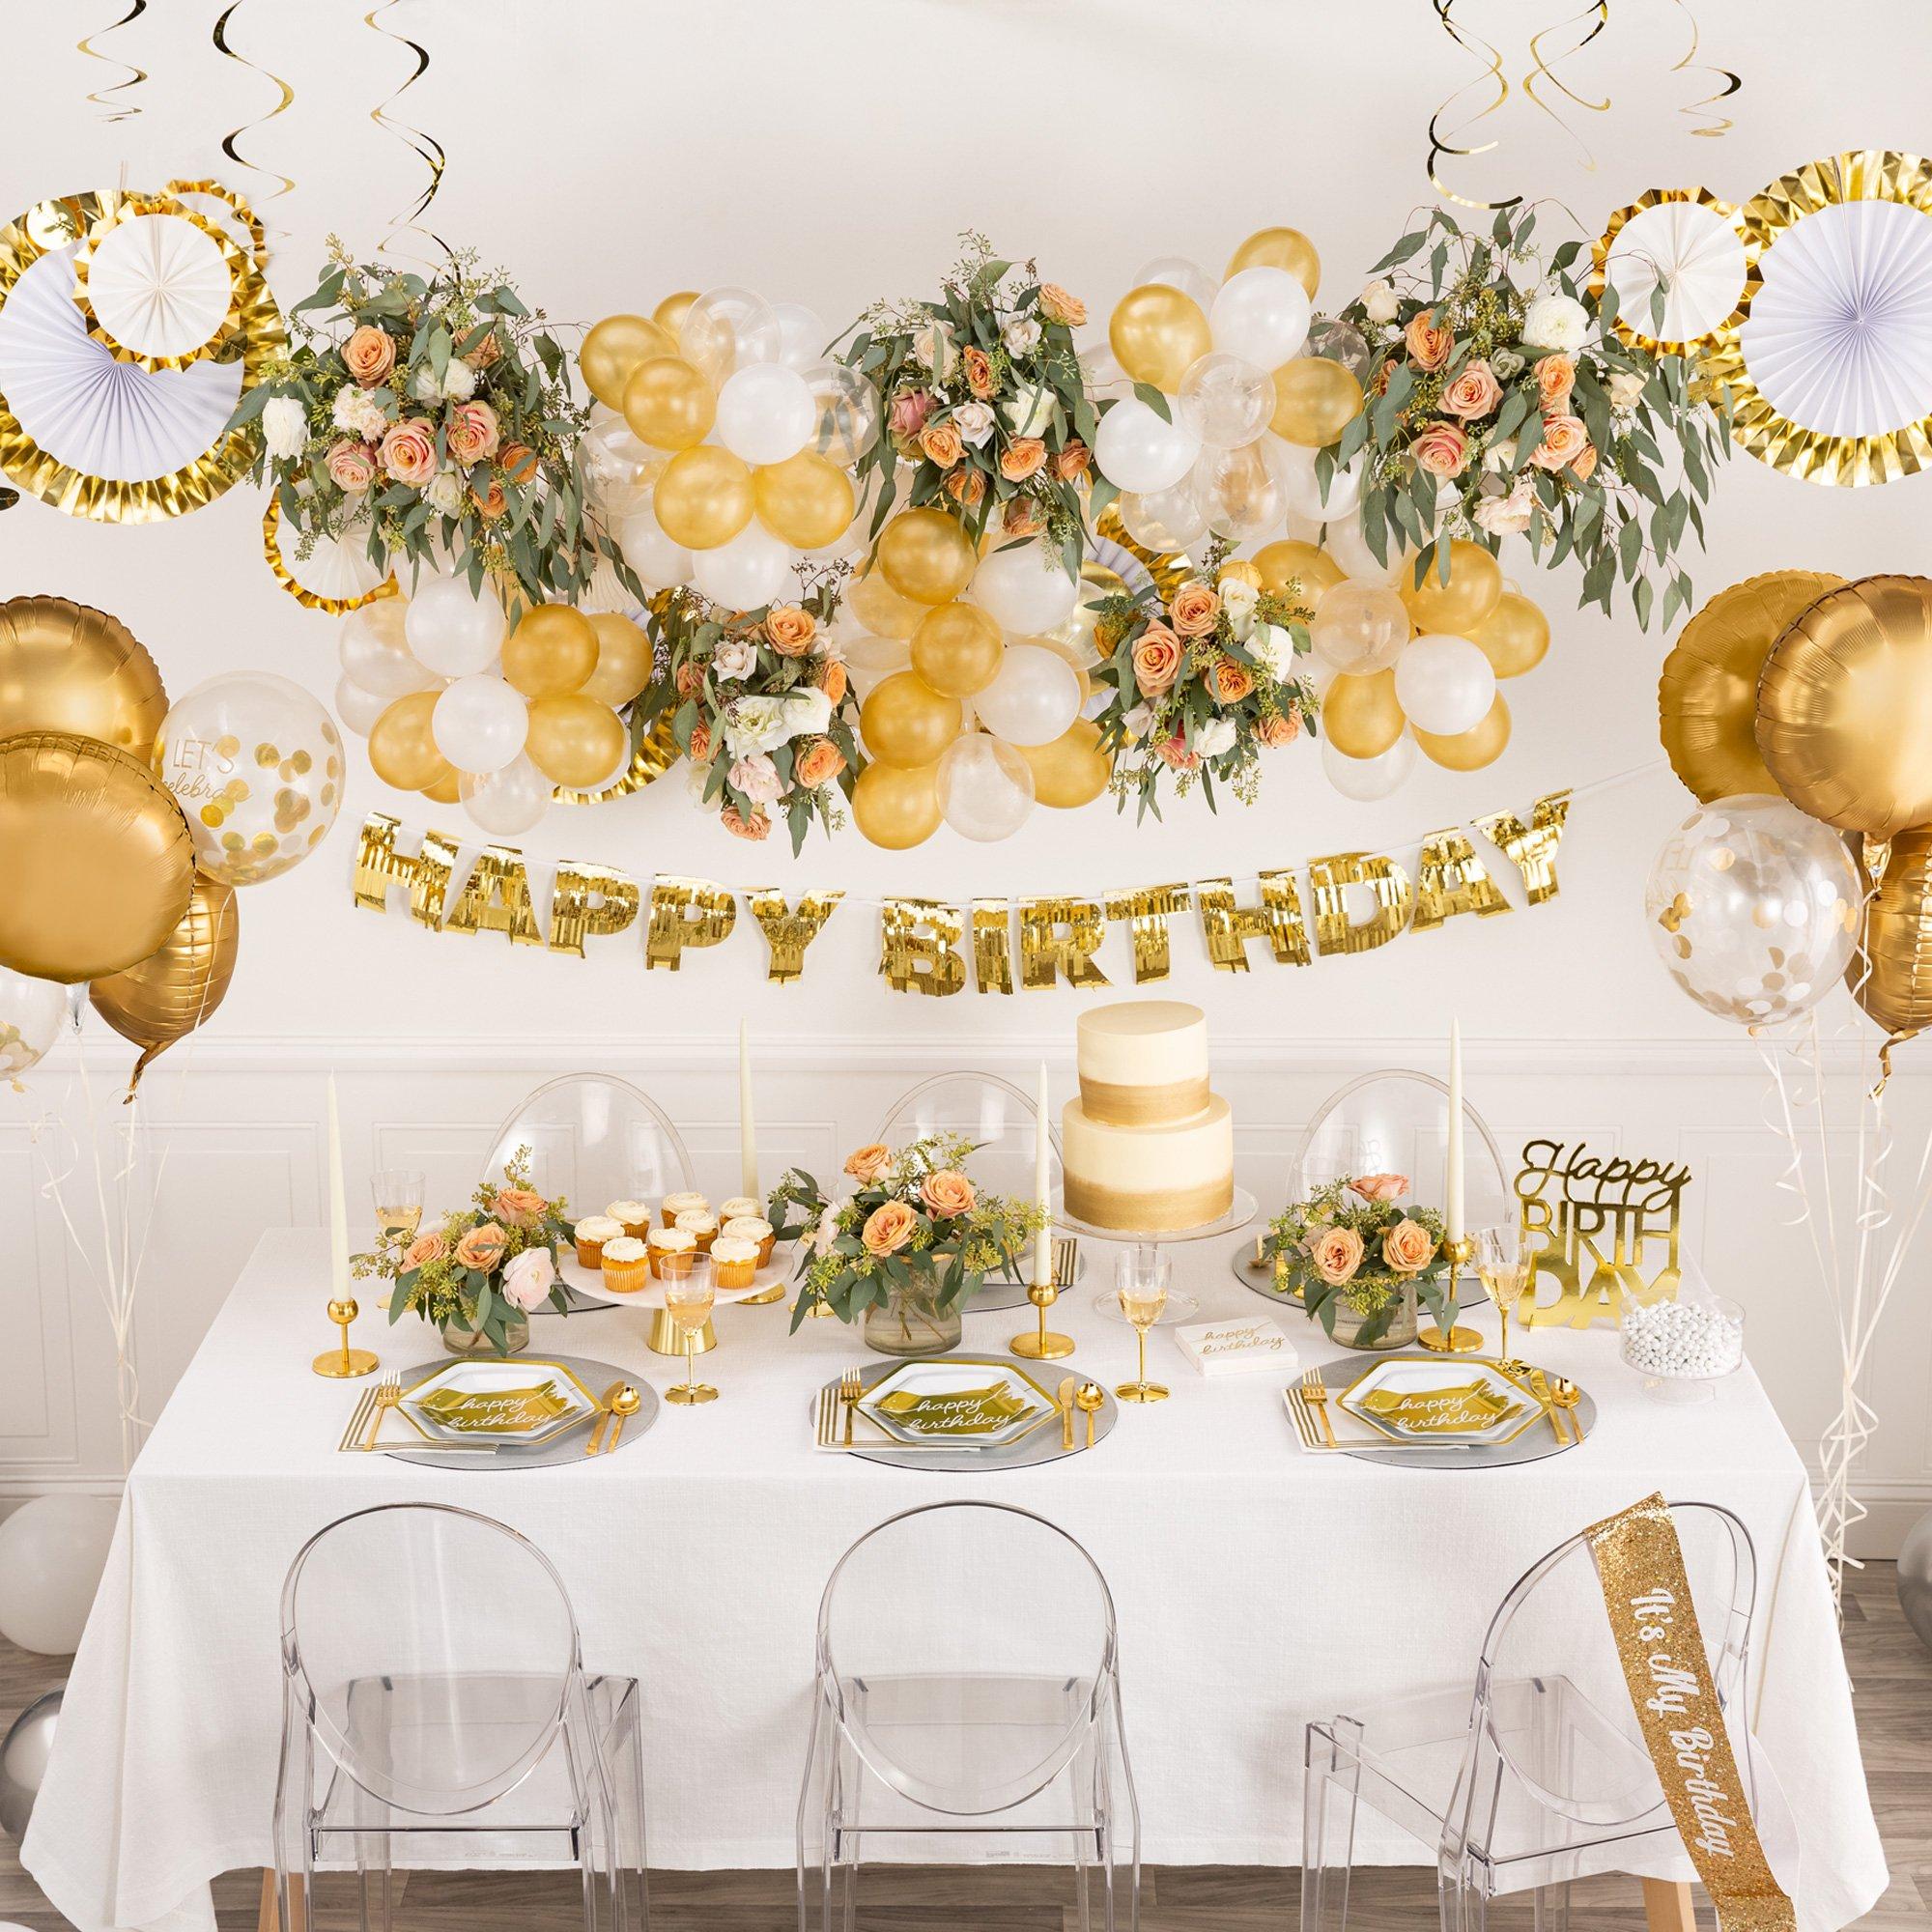 90th Birthday Party Supplies, Decorations & Ideas